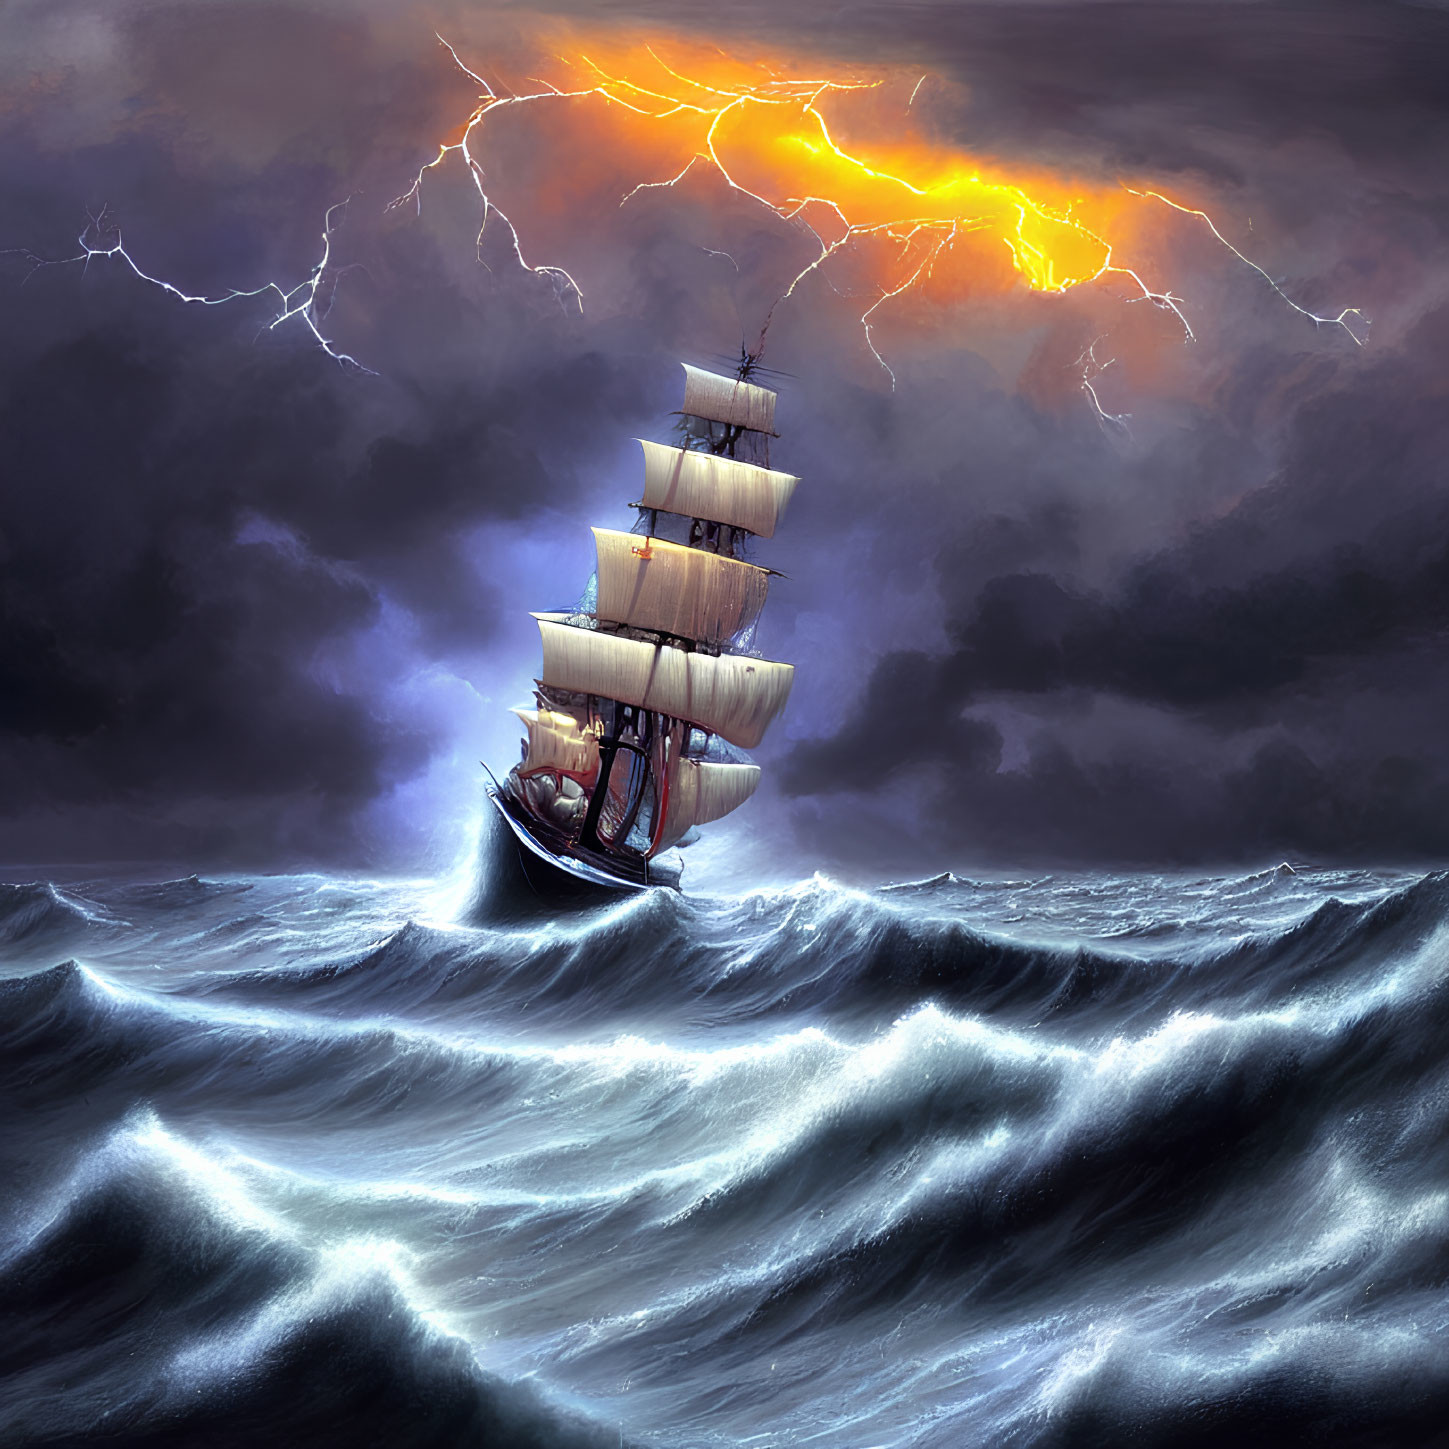 Sailing ship in stormy ocean with lightning sky